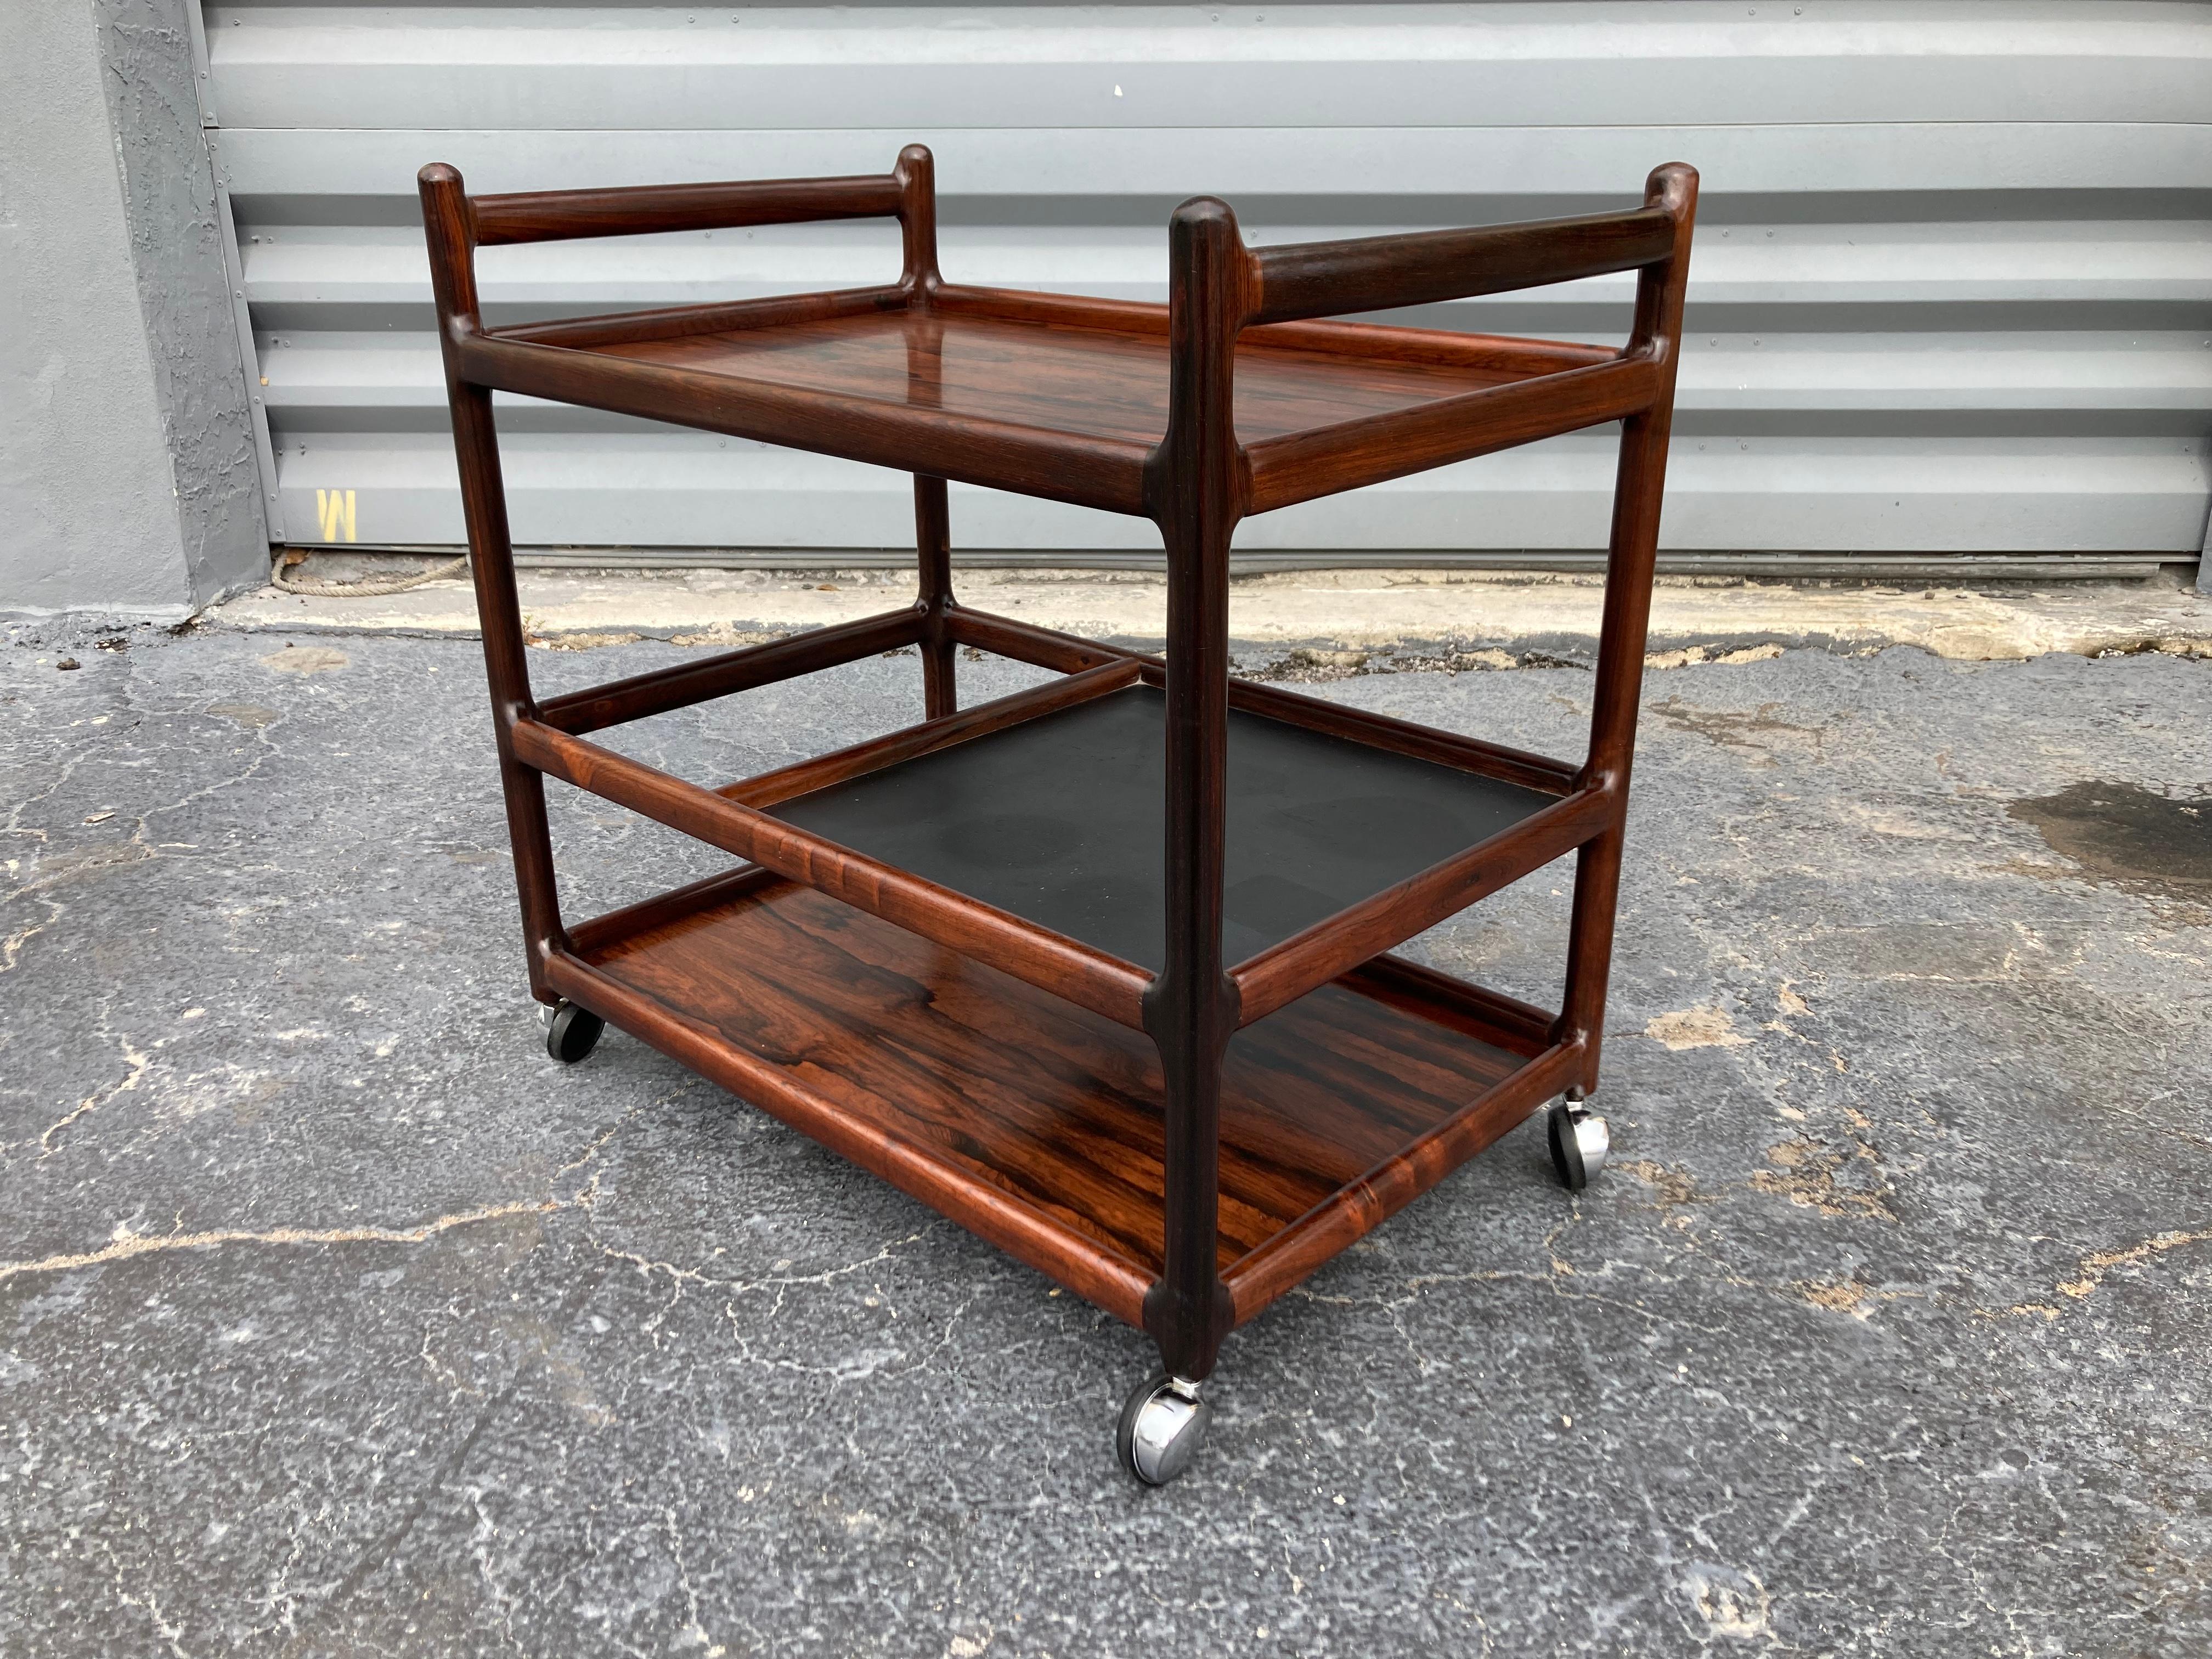 You may not need a bar cart but you do need this wood in your life :-)
Beautiful Rosewood bar cart by CFC Silkeborg in Denmark.